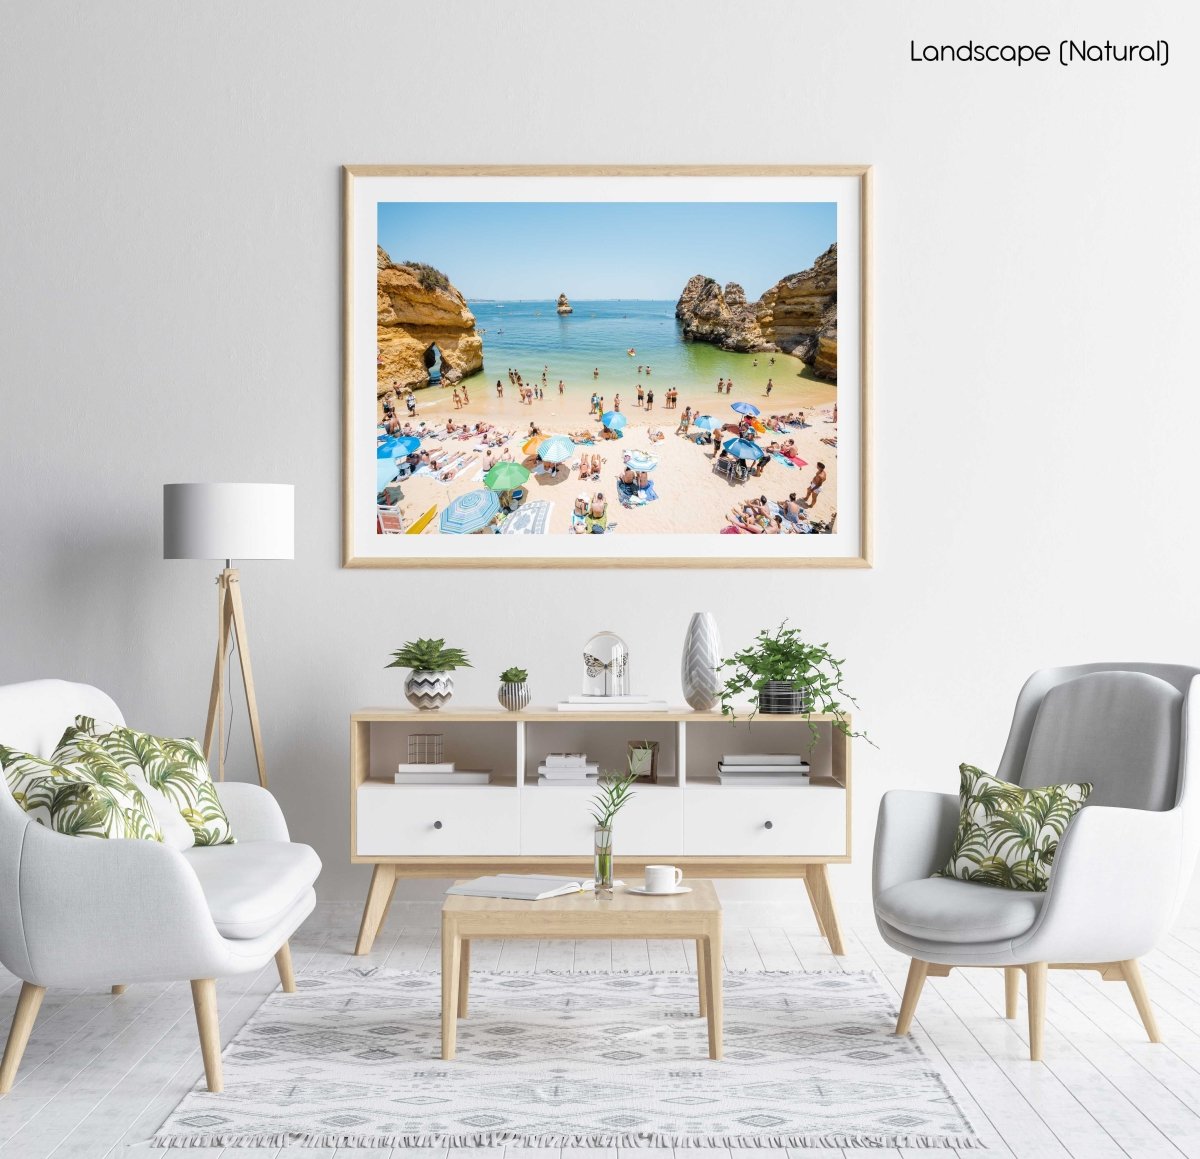 Busy Camilo beach with cliffs, people and calm green water in a natural fine art frame